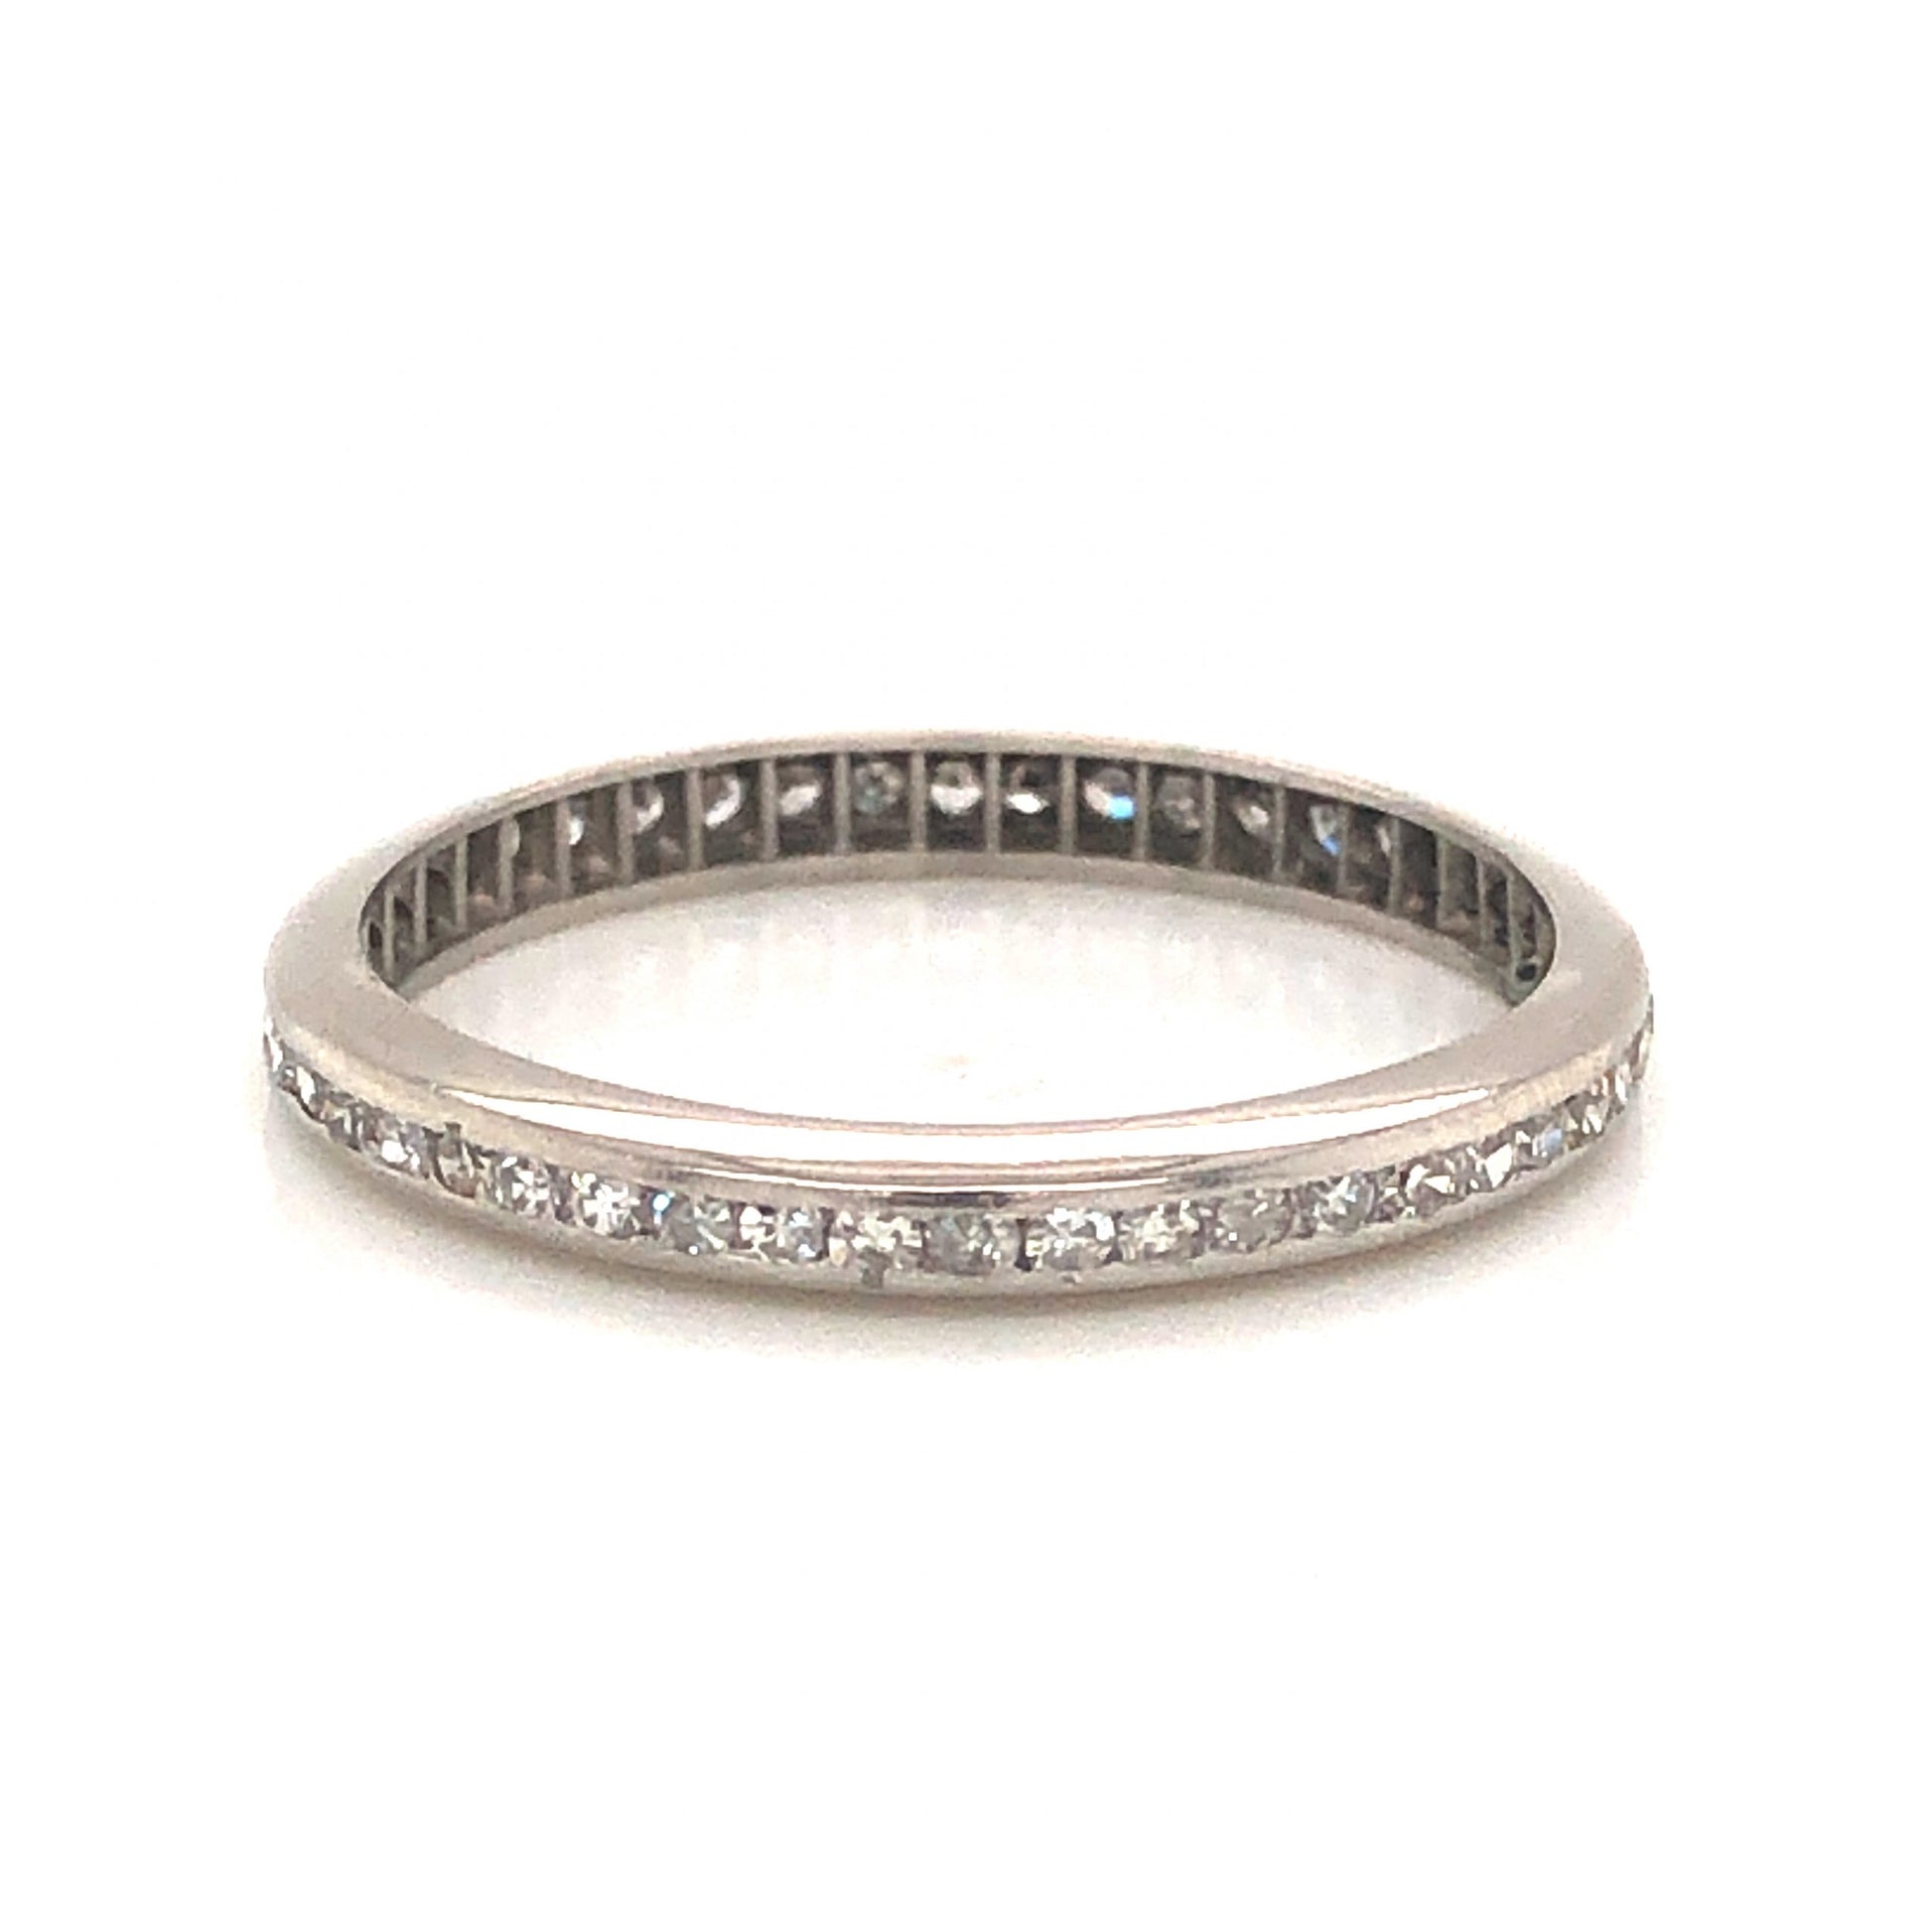 .48 Single Cut Diamond Eternity Band in PlatinumComposition: Platinum Ring Size: 6 Total Diamond Weight: .48ct Total Gram Weight: 1.7 g